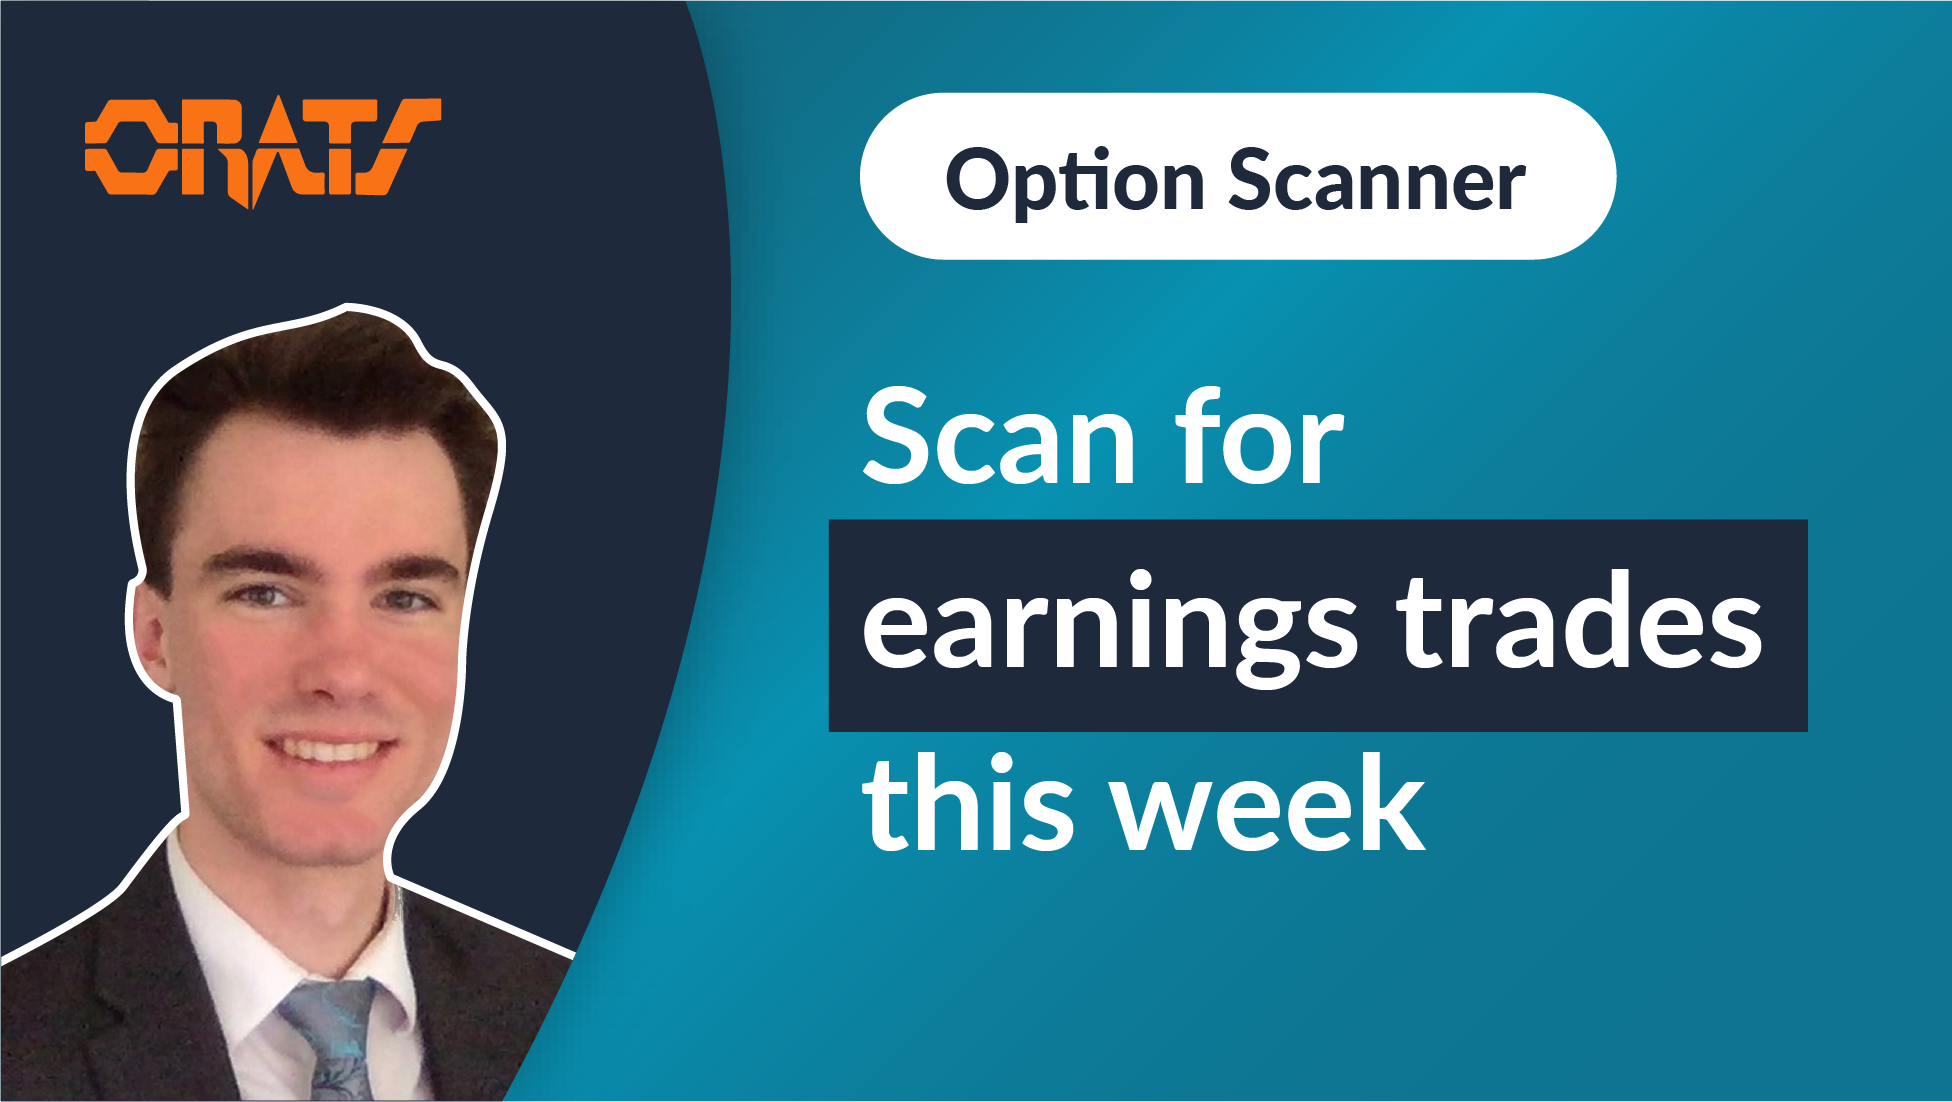 Scan for Earnings Trades This Week Using ORATS Theoretical Values